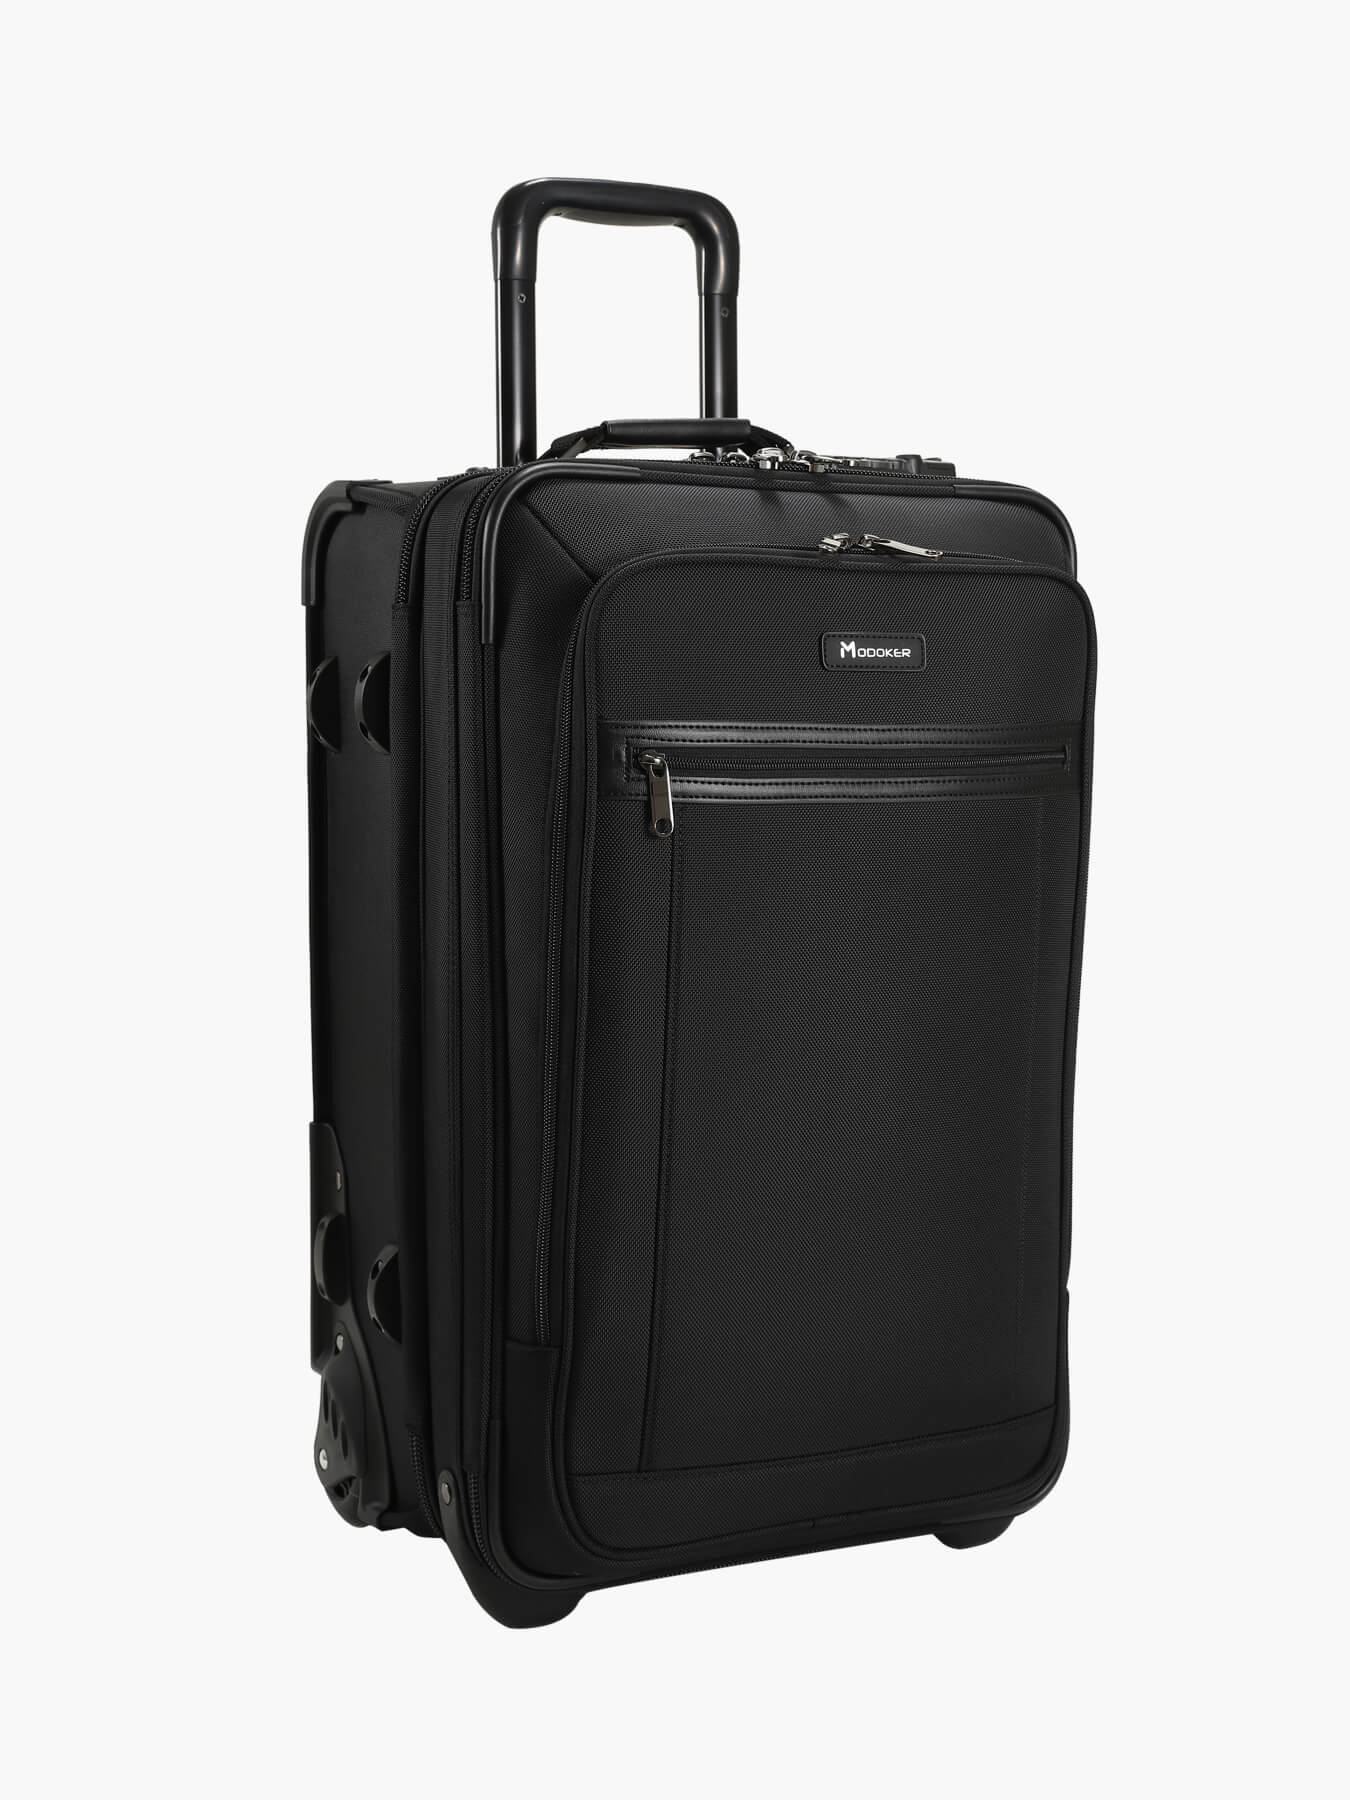 Large Garment Duffle Bag with Wheels